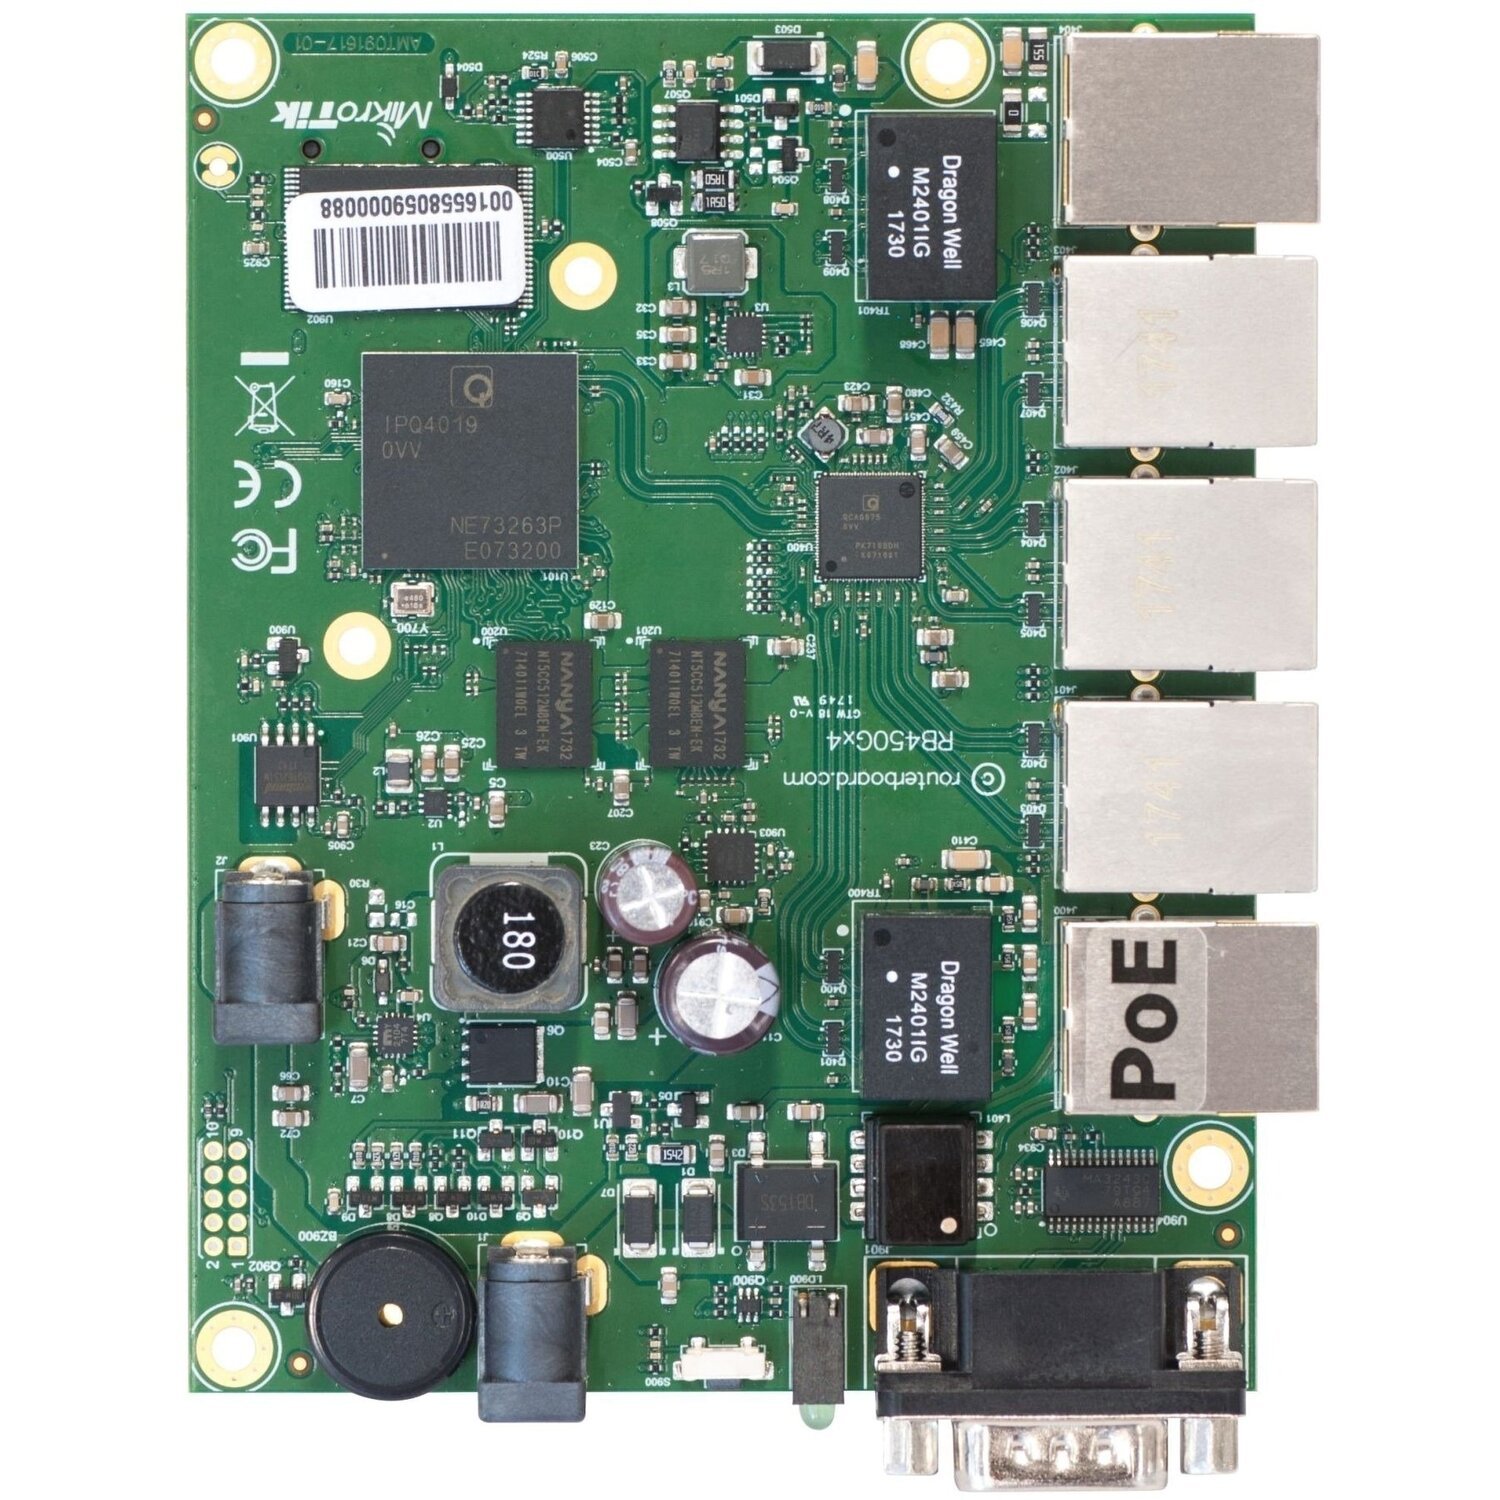 Маршрутизатор MikroTik RouterBOARD RB450Gx4 (RB450Gx4) фото 